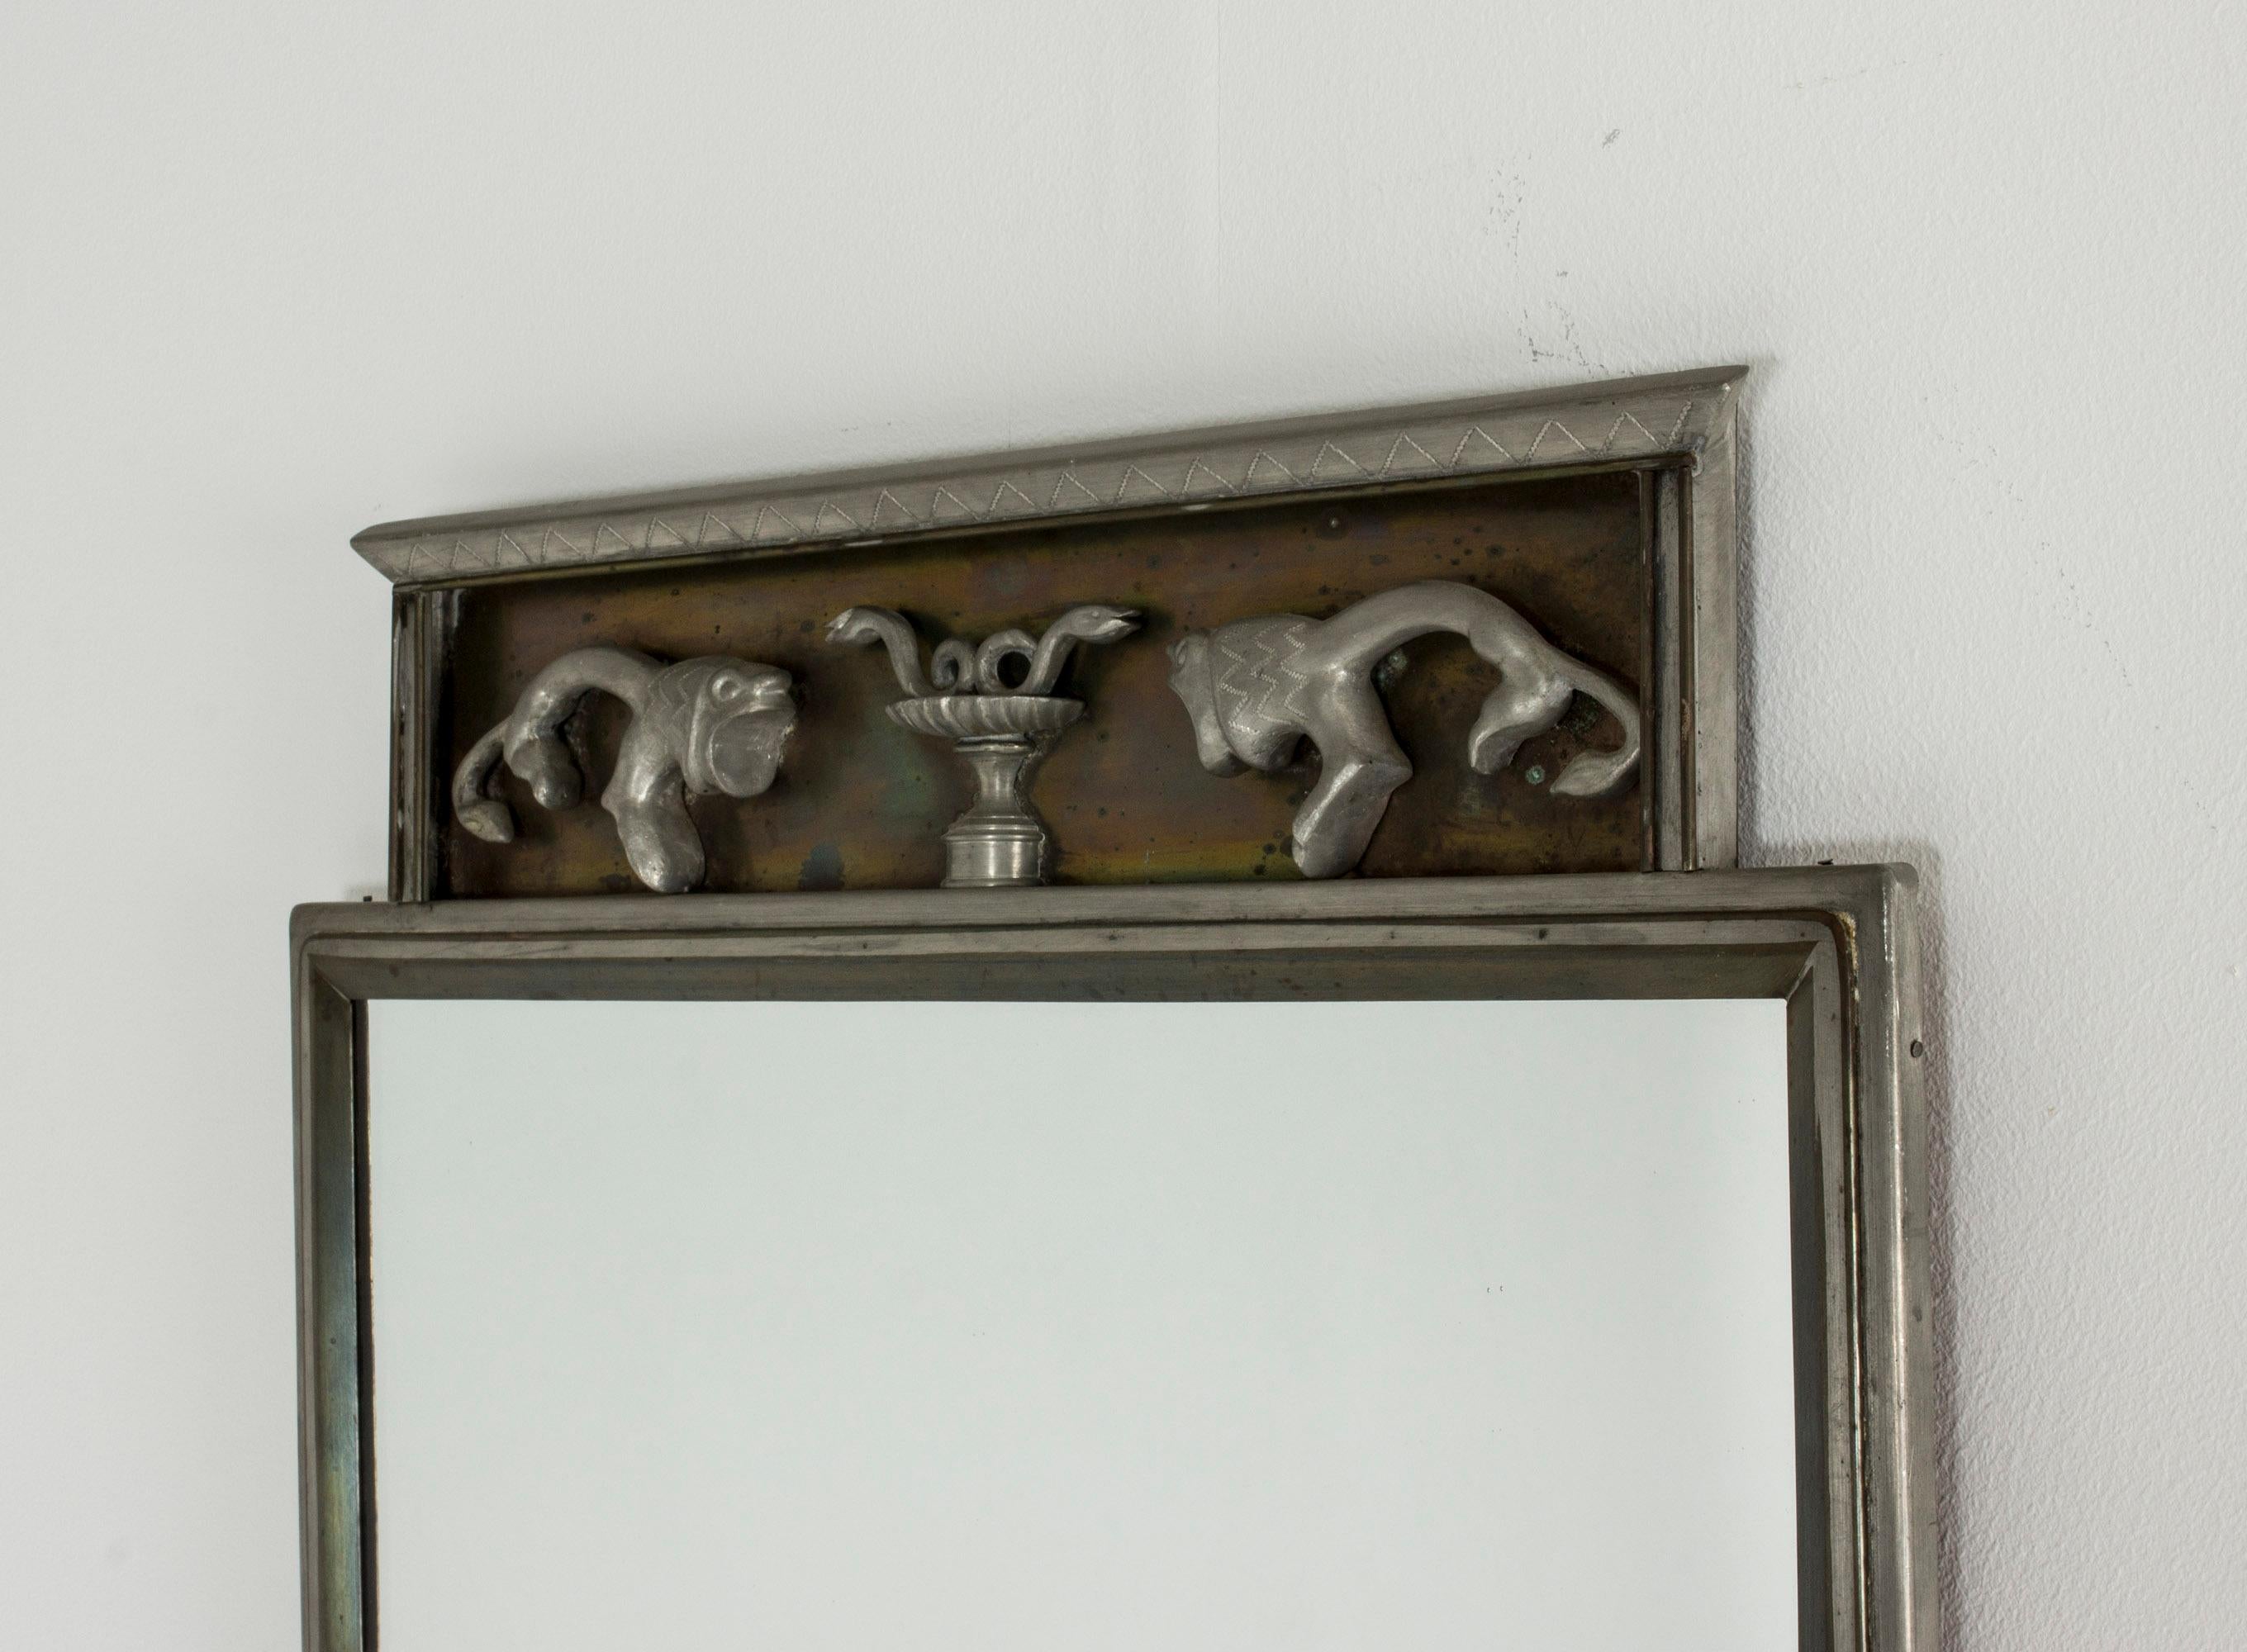 Scandinavian Modern 1930s Pewter Wall Mirror by Nils Fougstedt